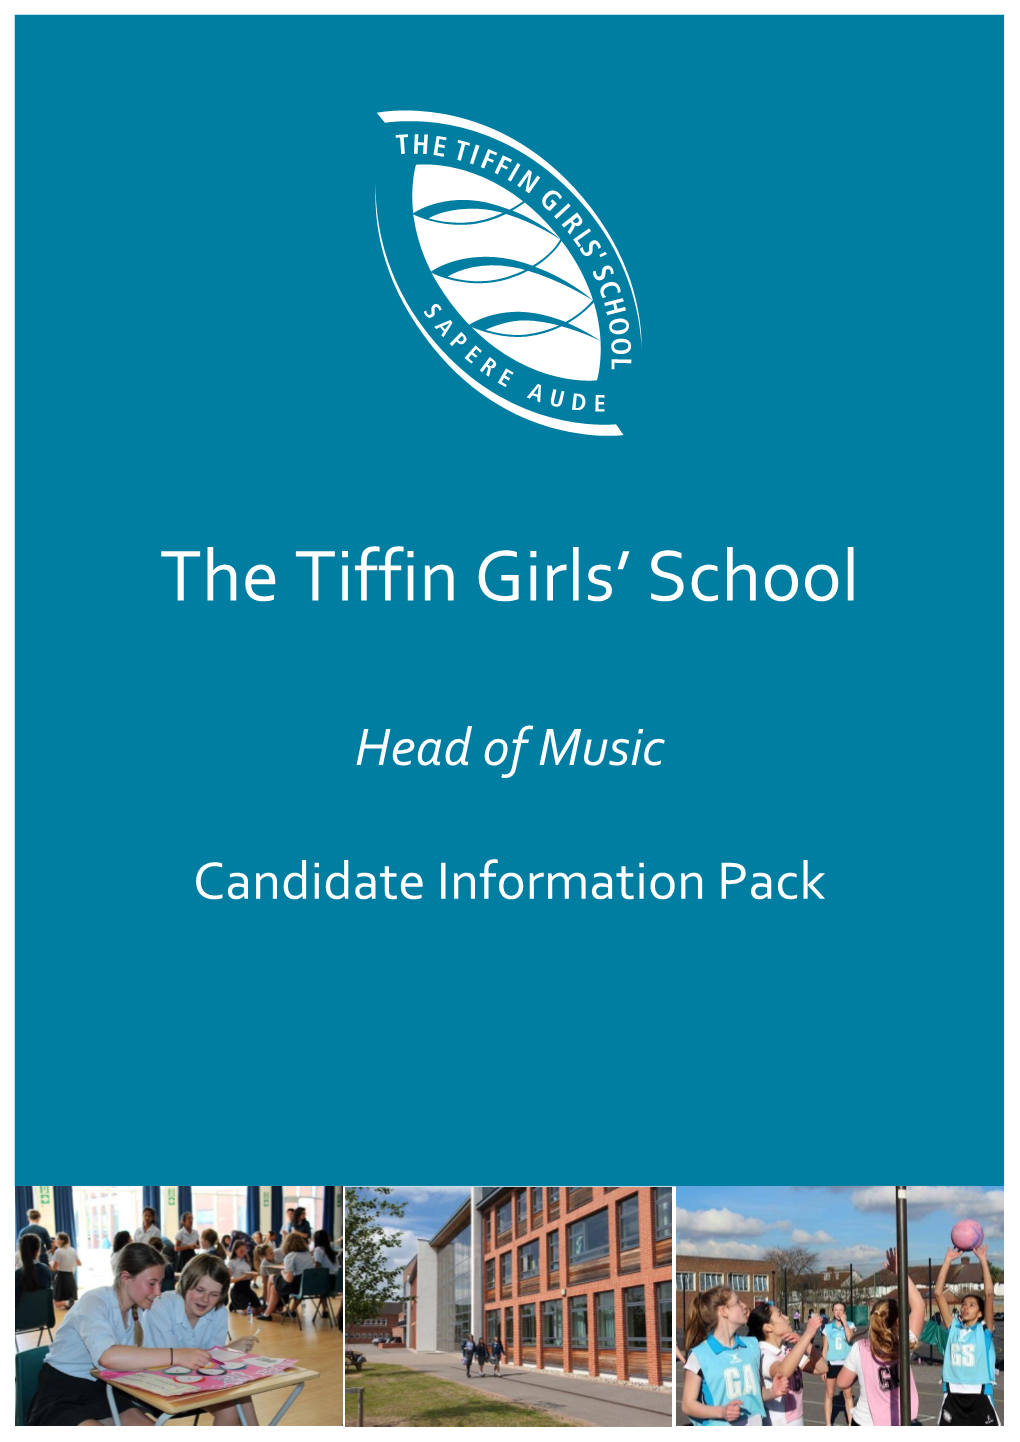 Head of Music Candidate Information Pack